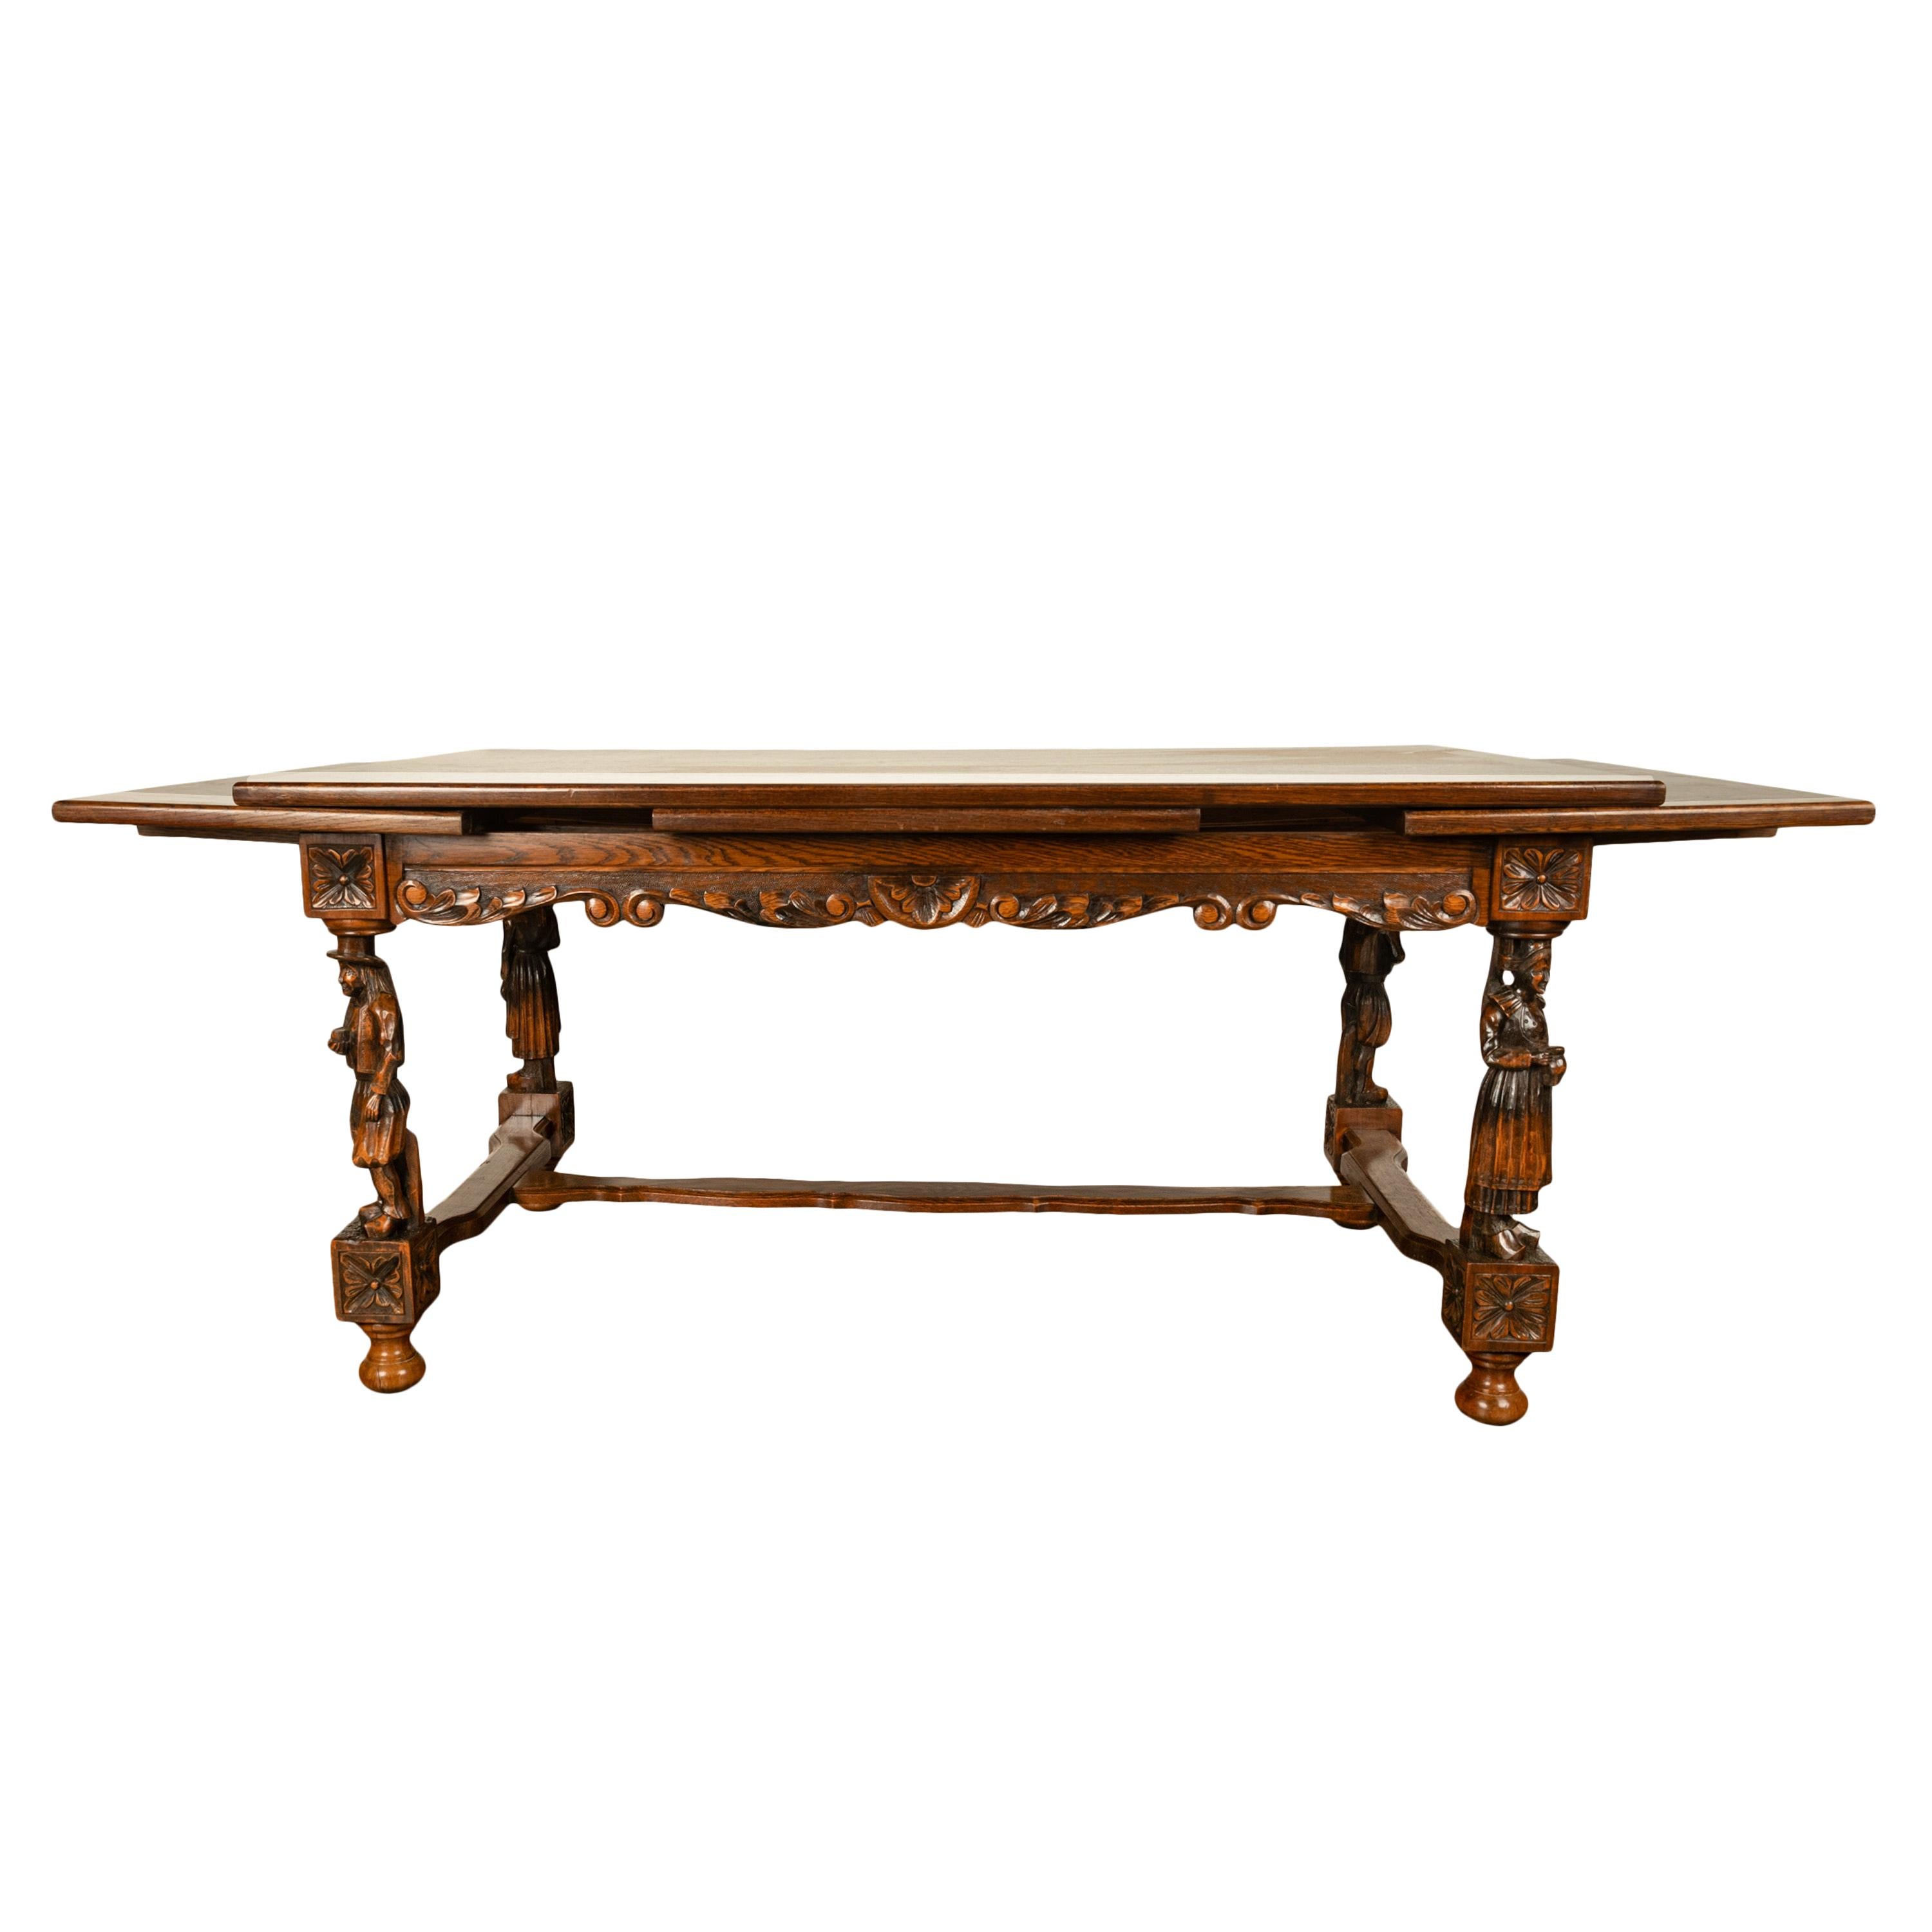 Antique Carved Figural French Breton Inlaid Dining Extending Table Brittany 1900 For Sale 1